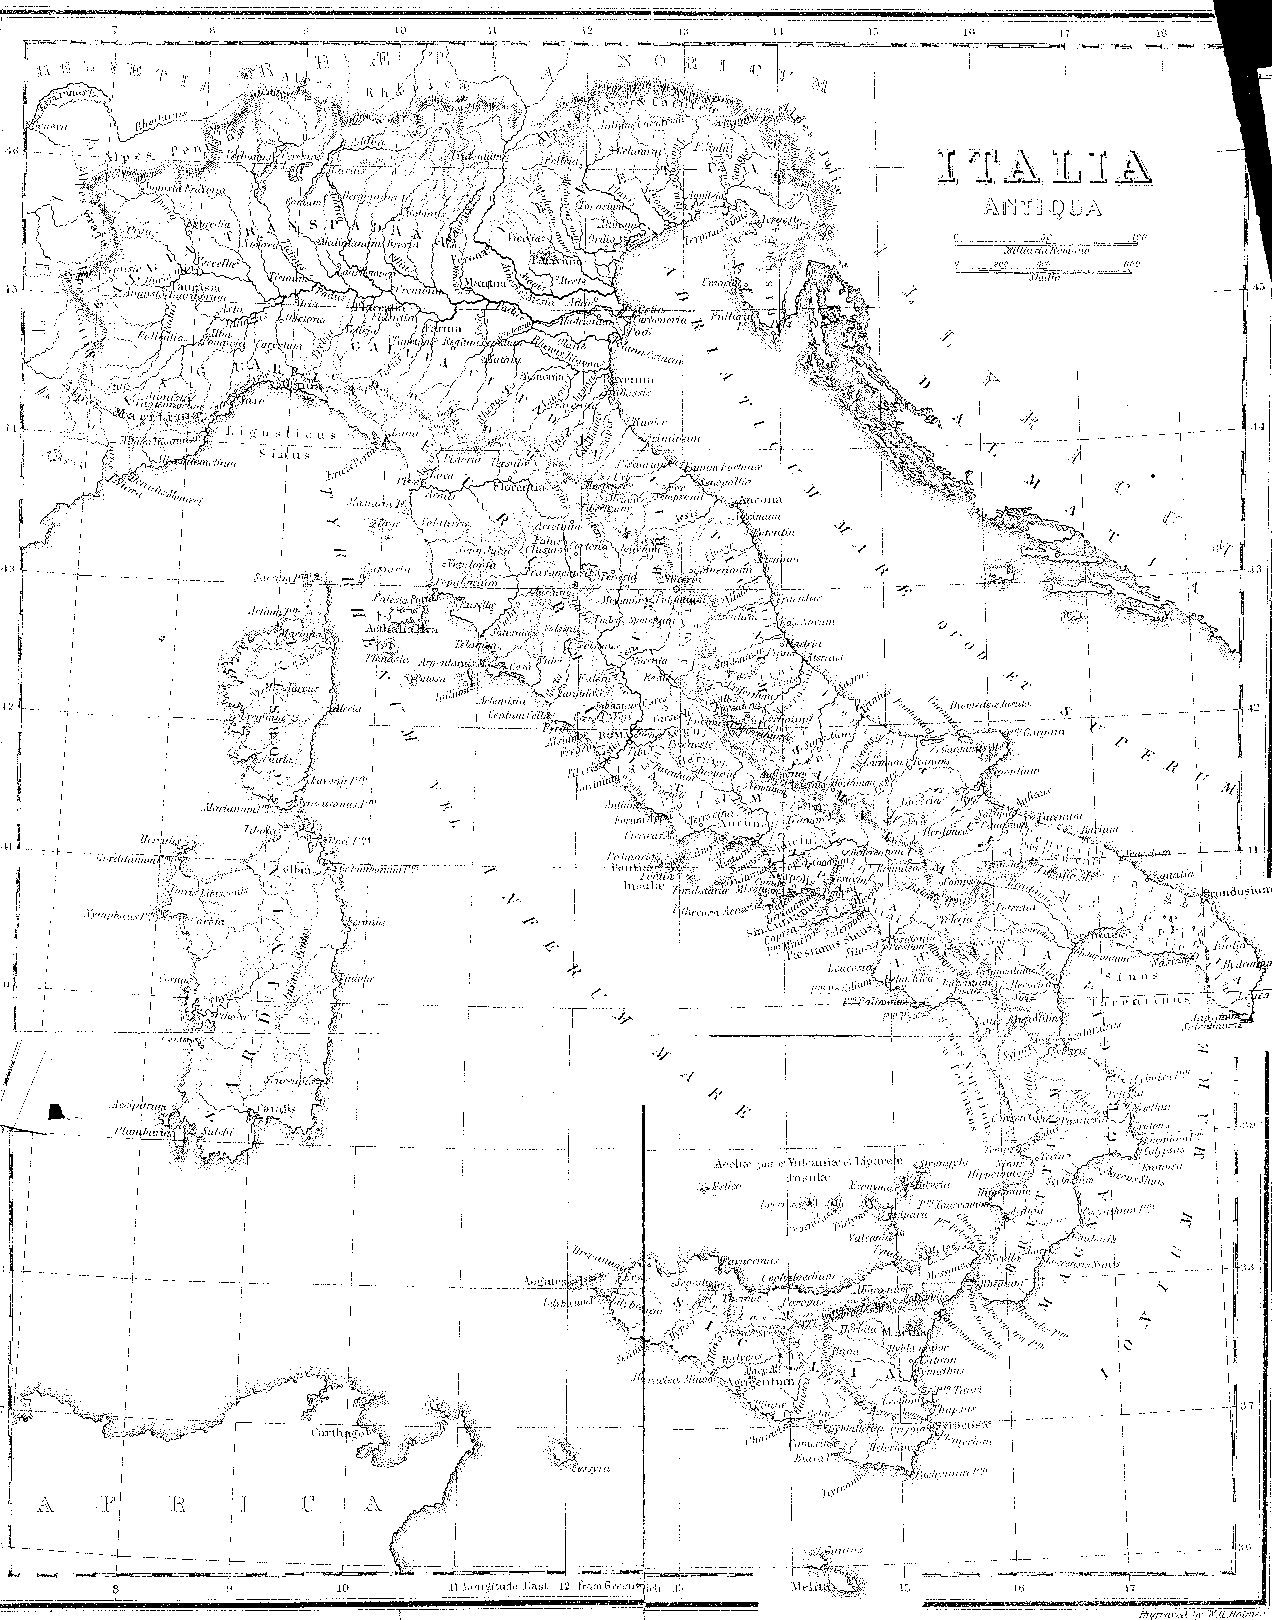 [Map of Italy] from Young Folks Plutarch by Rosalie Kaufman